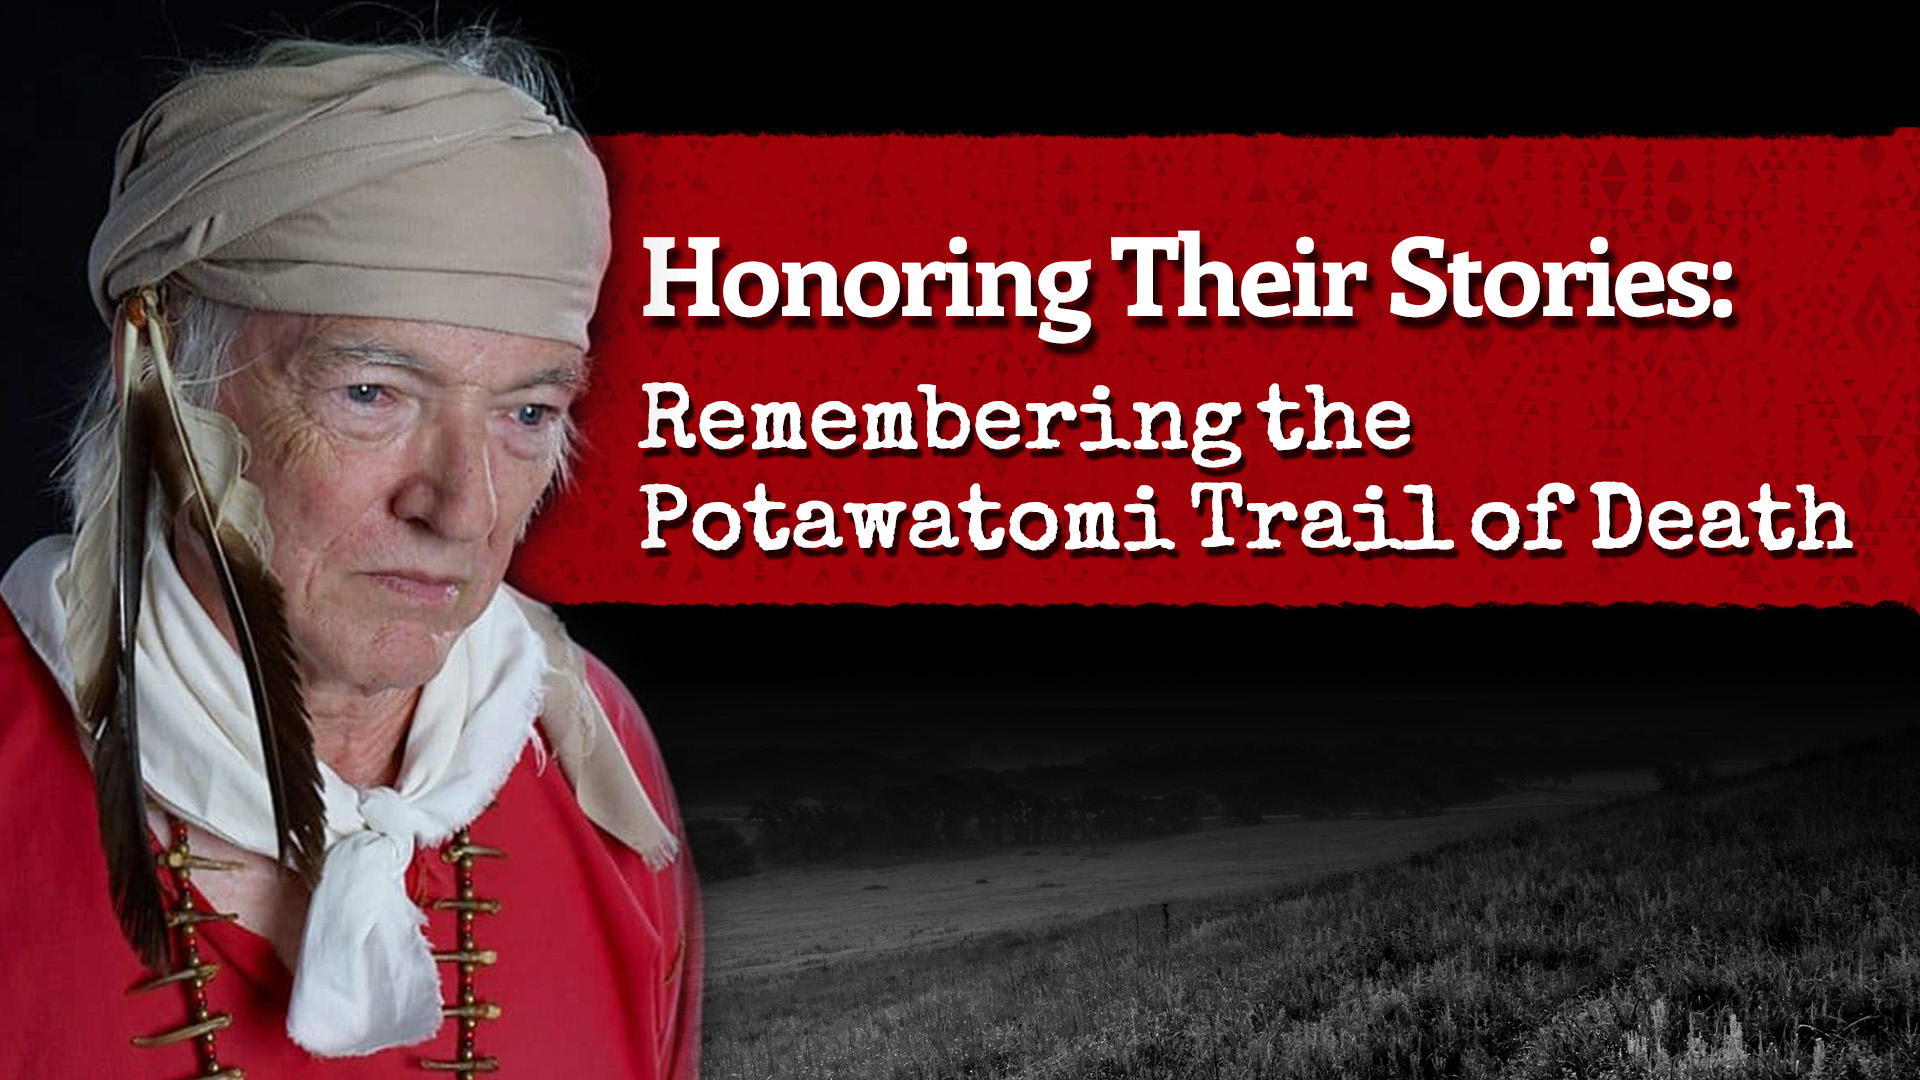 Graphic featuring George Godfrey, Potawatomi educator, historian, and scholar. He is pictured on the left of the image, looking down and slightly forward. There is white text on a red background that reads â€œHonoring Their Stories: Remembering the Potawatomi Trail of Deathâ€. Image from the Facebook event page. 